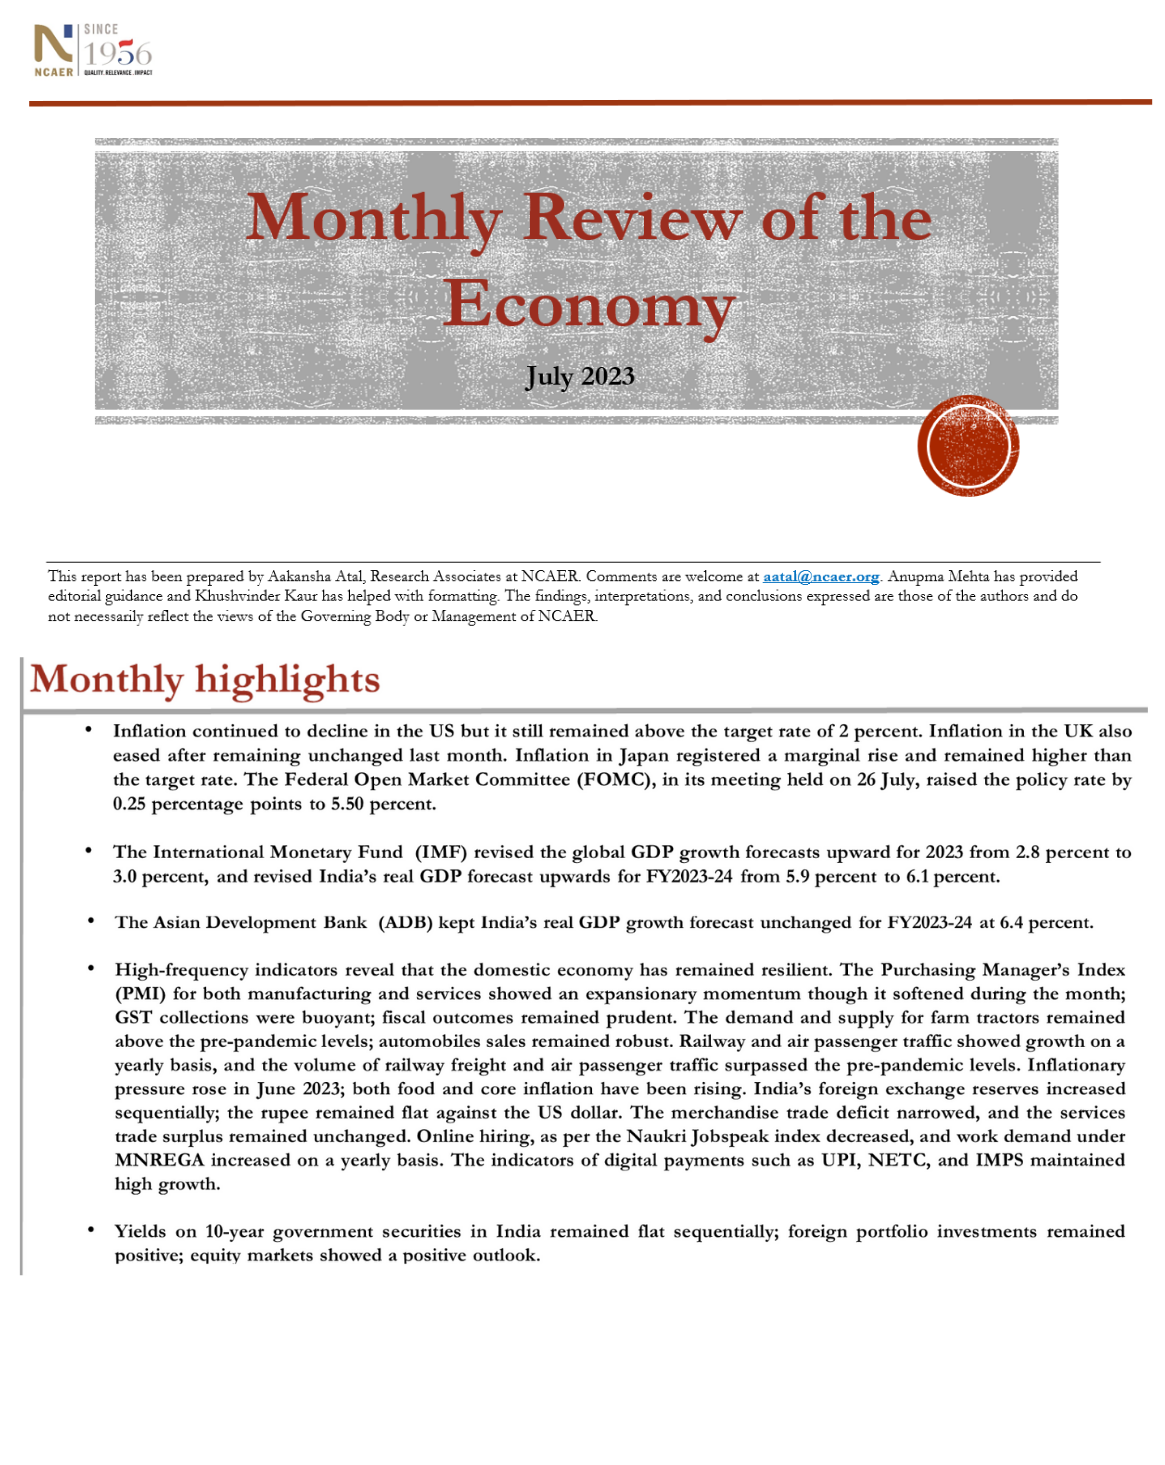 Monthly Review of the Economy: July 2023